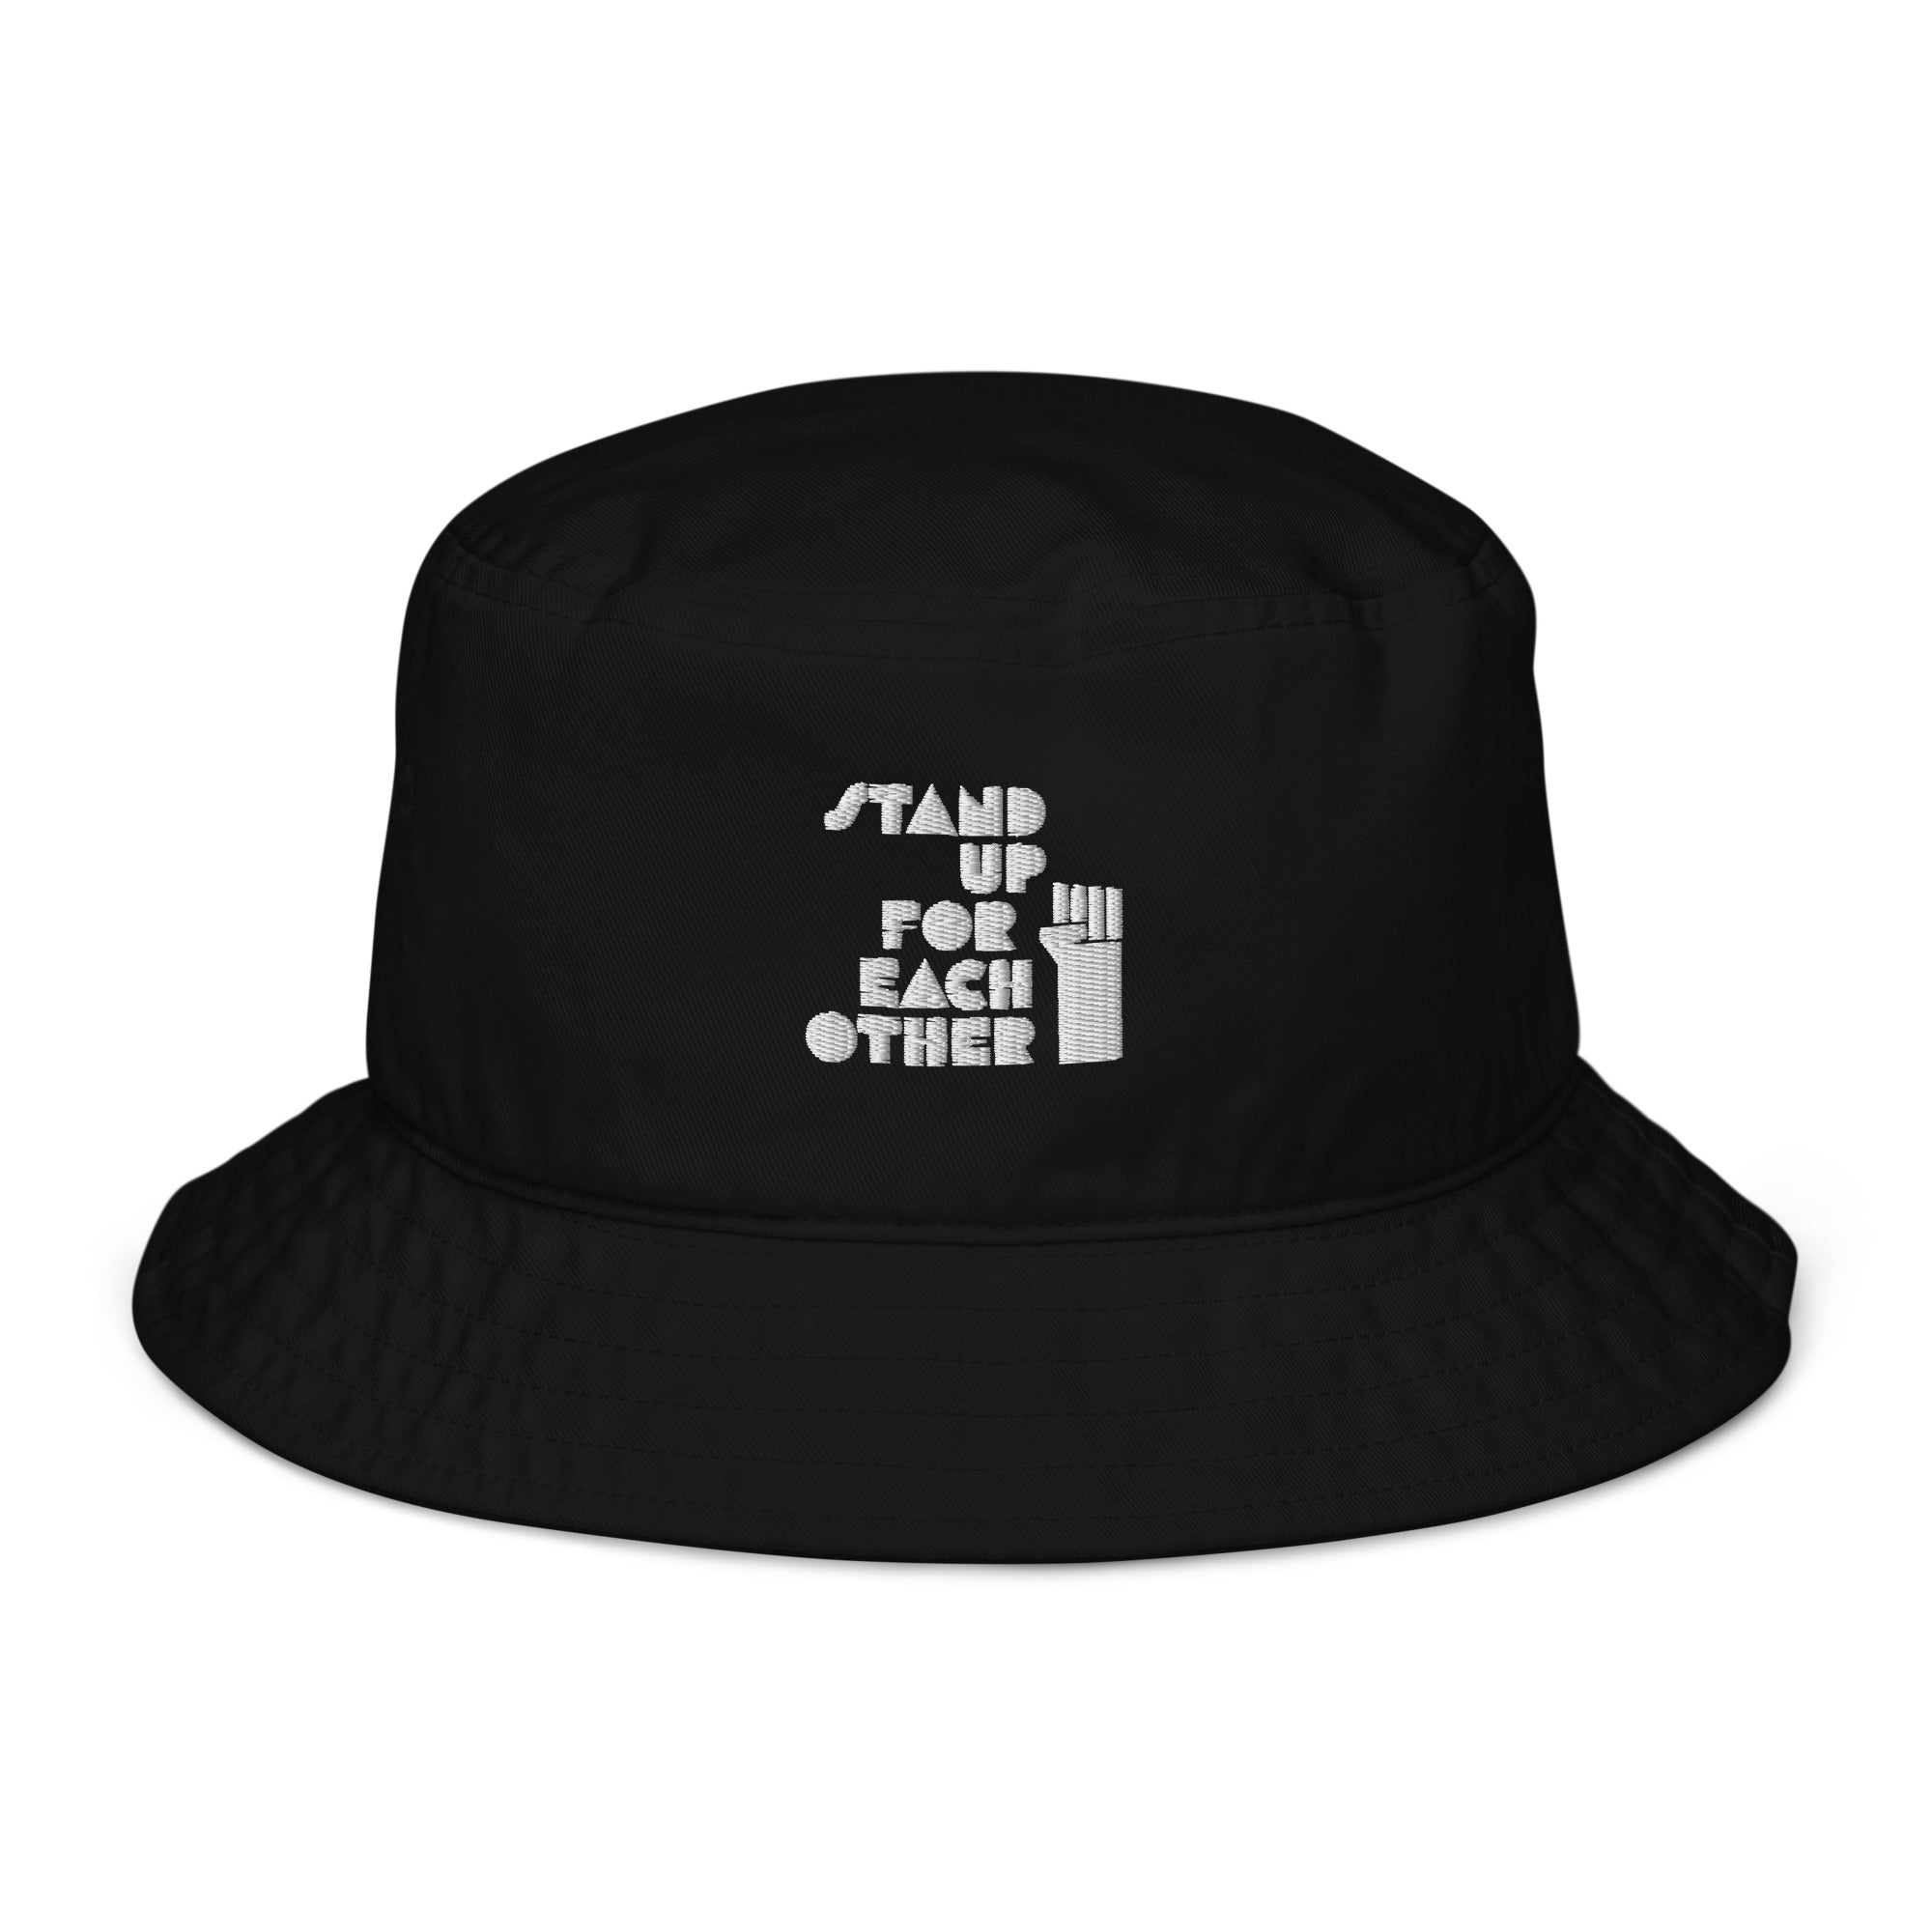 Stand Up For Each Other Social Justice Embroidered Organic Cotton Black Bucket Hat